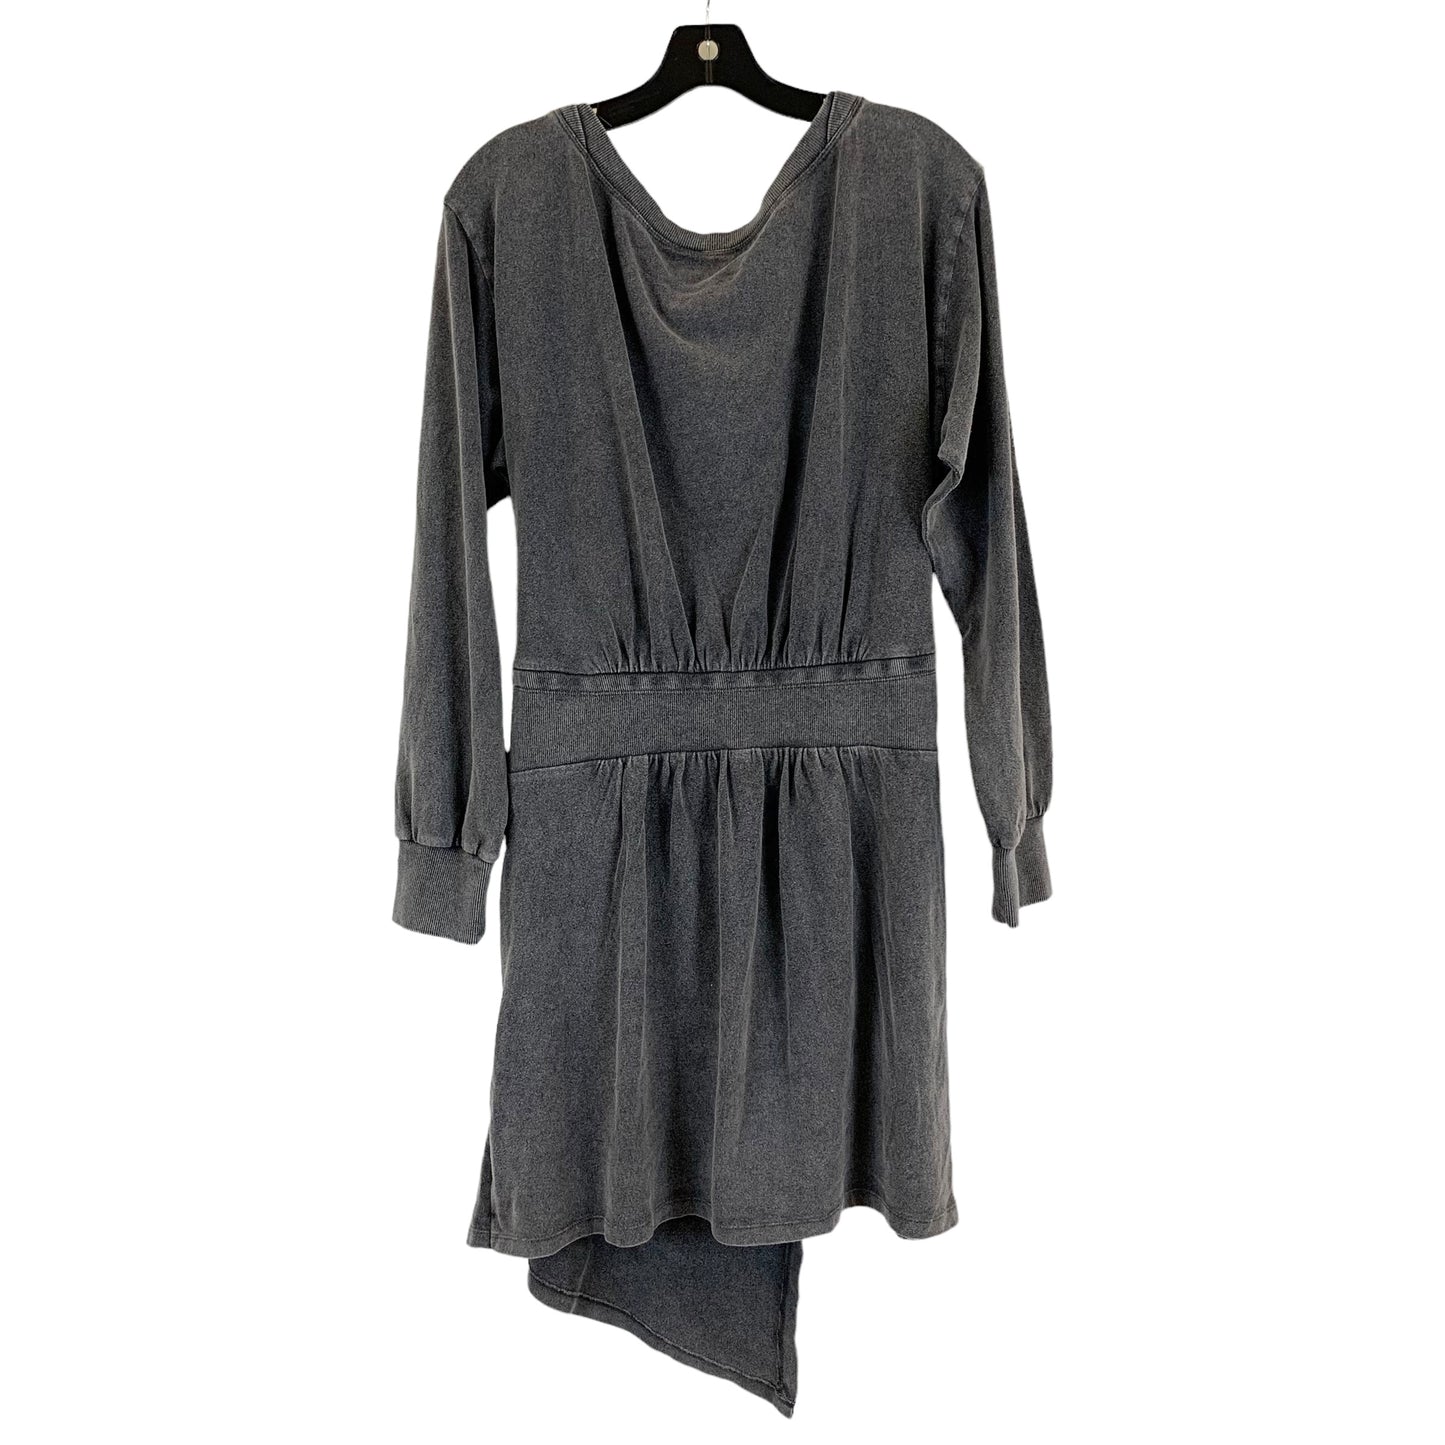 Dress Sweater By Daily Practice By Anthropologie  Size: L